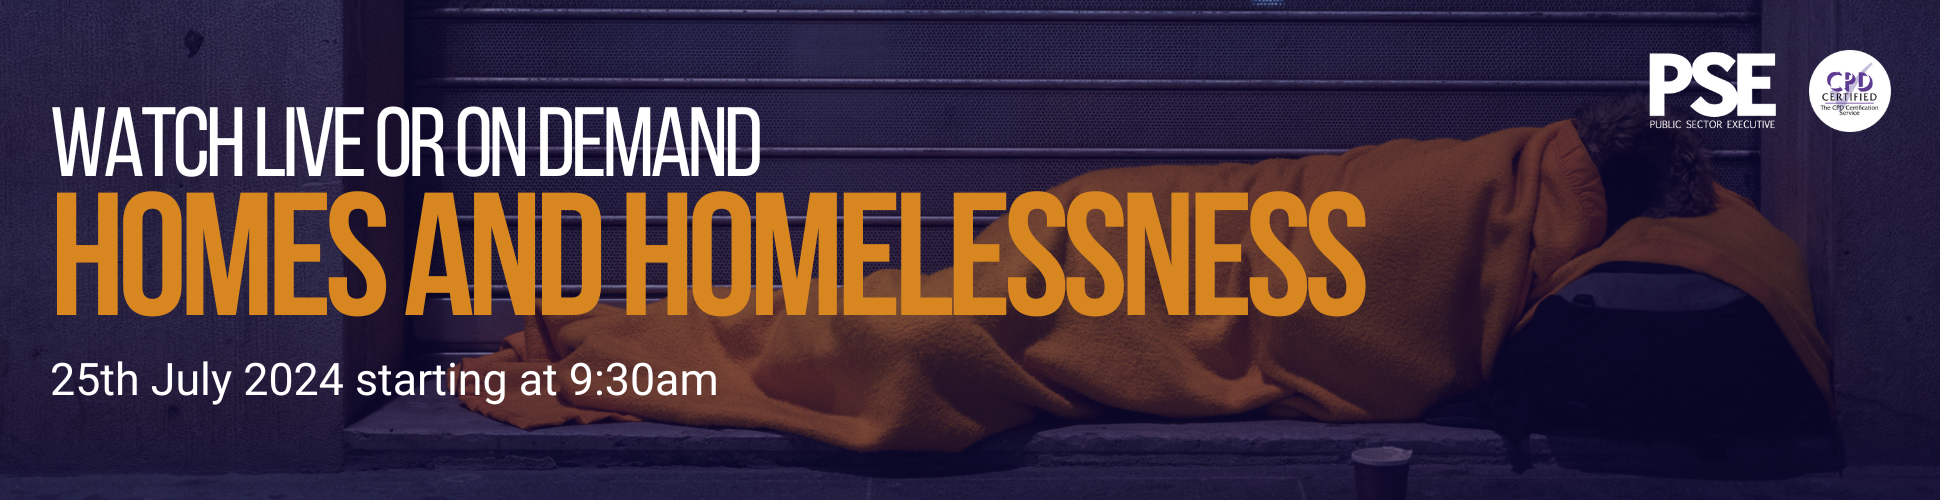 Homes and Homelessness